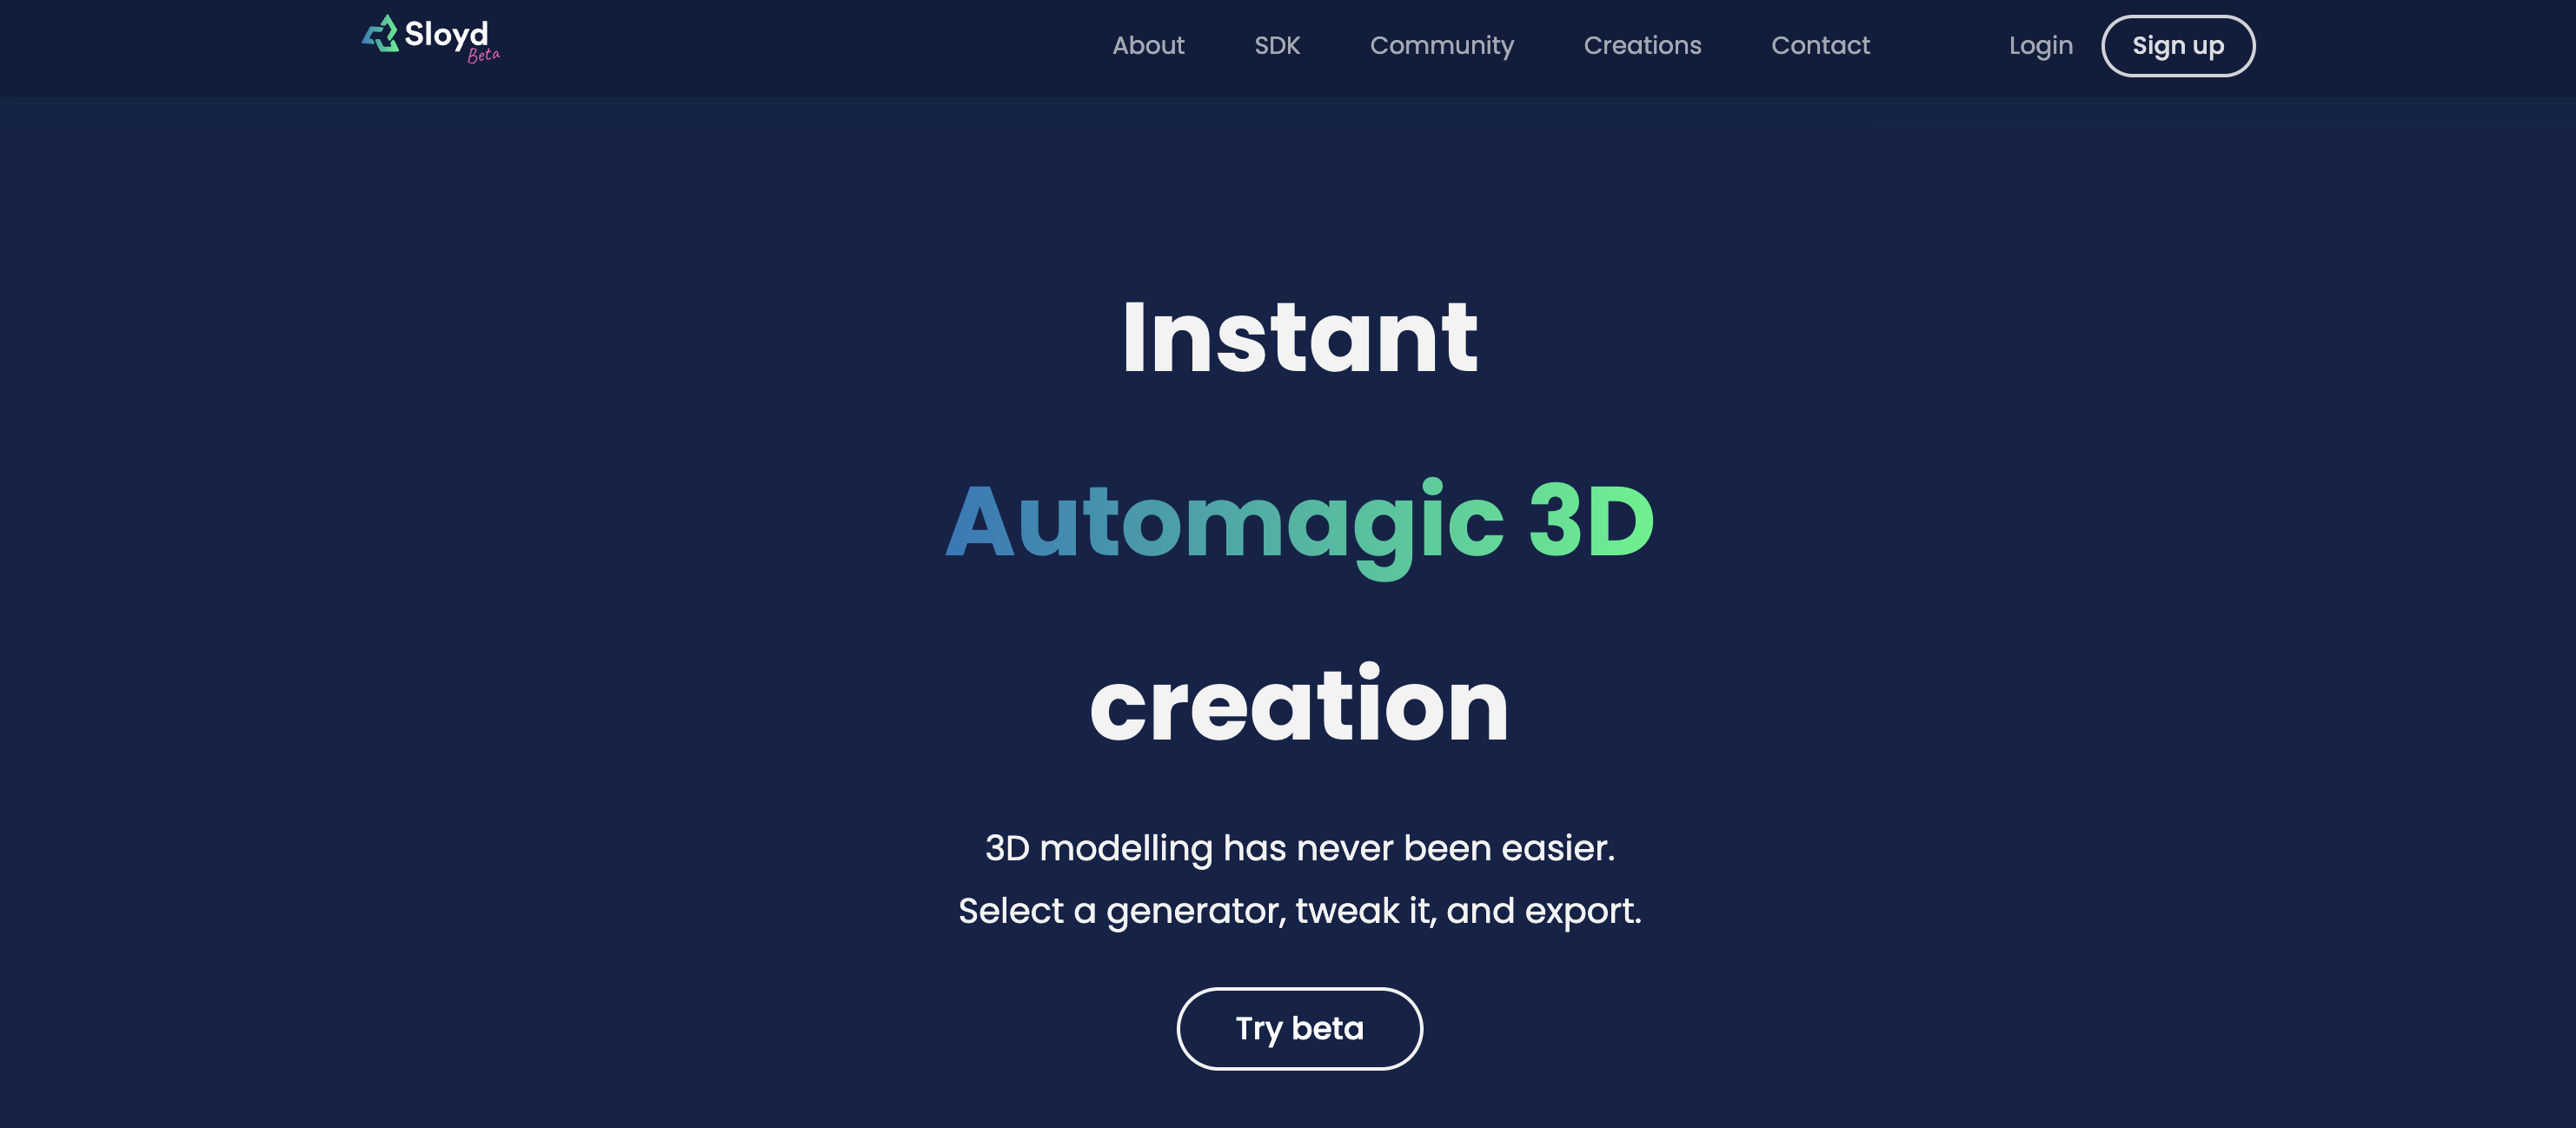 How to Create 3D Assets for Your Game in Minutes with Sloyd.AI